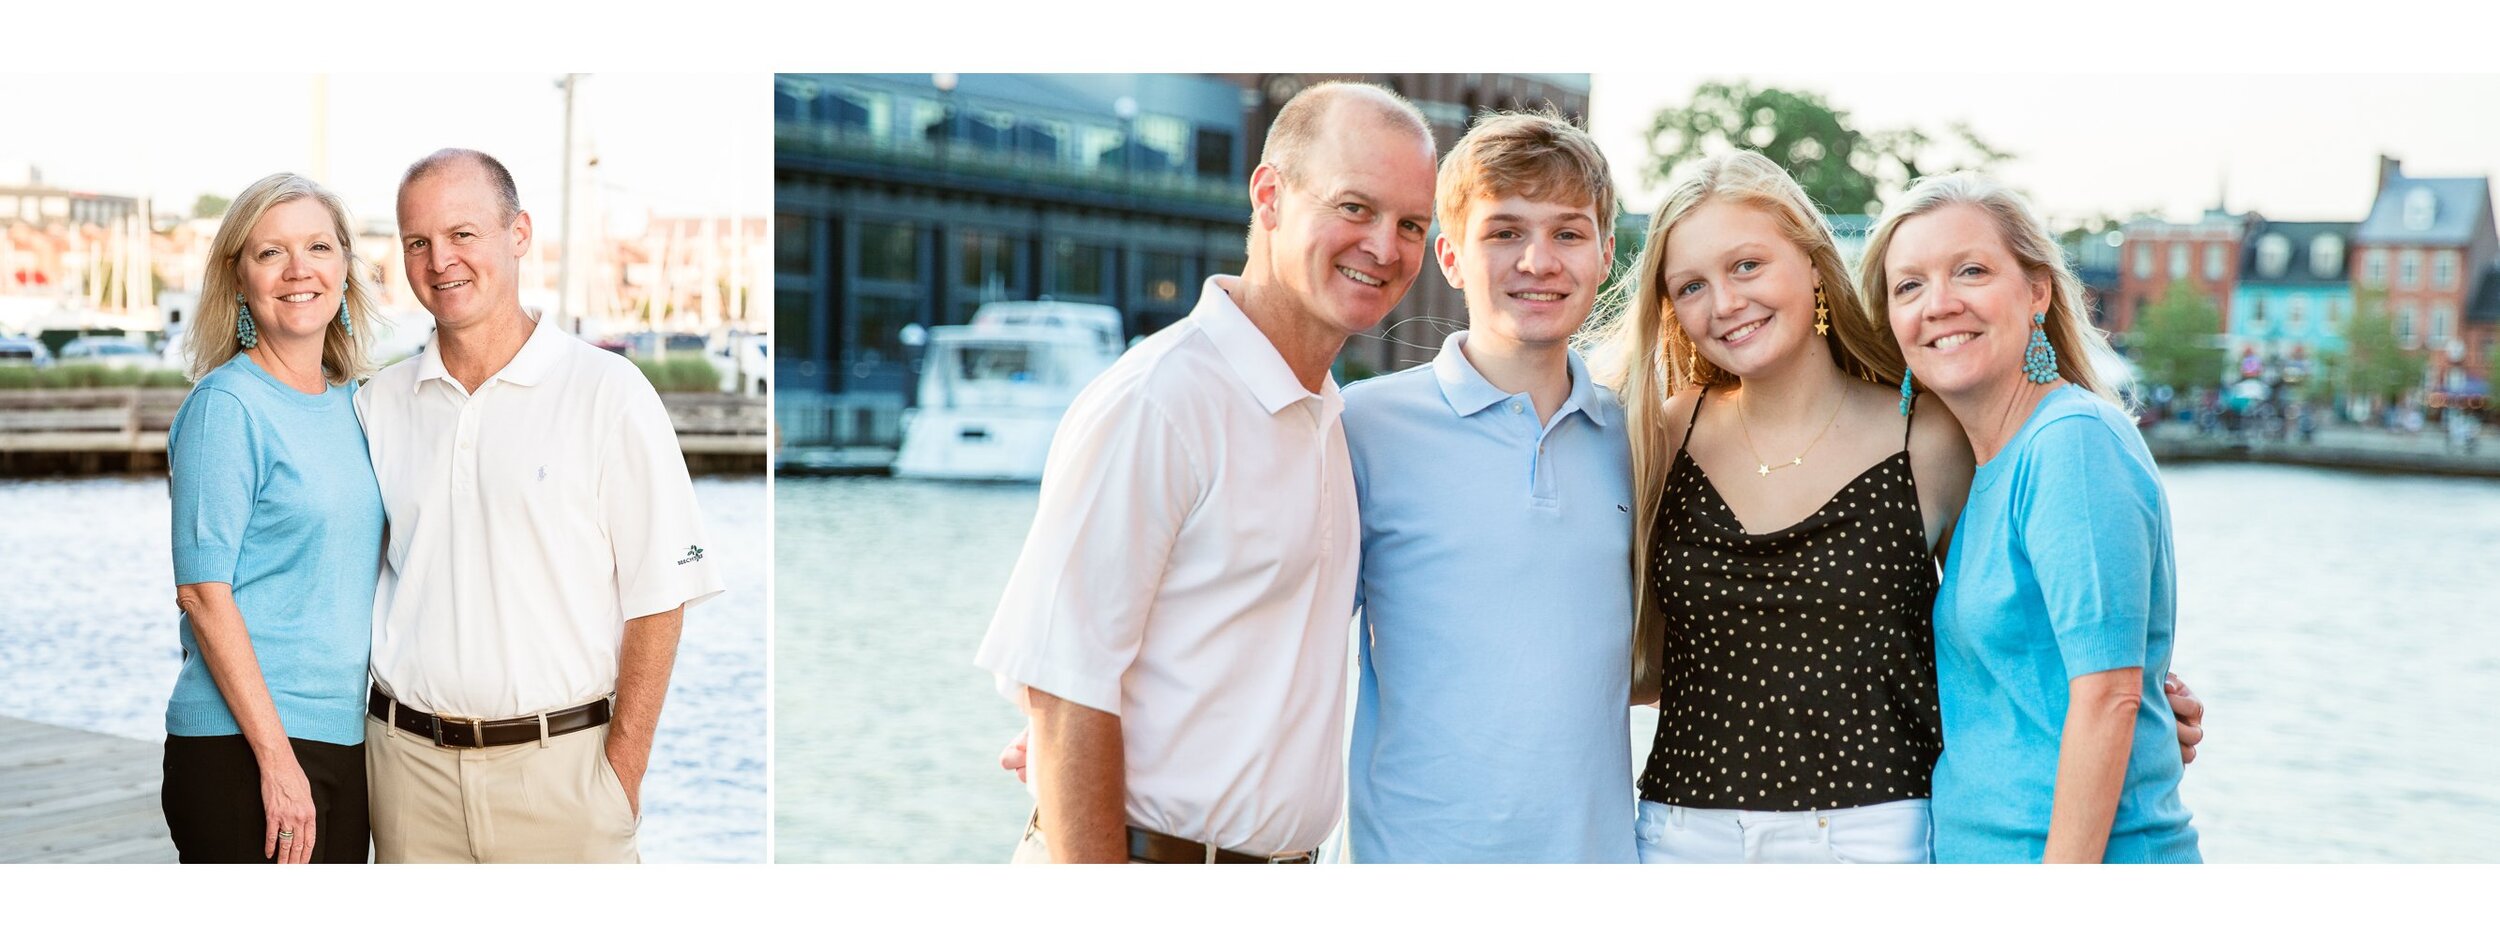 baltimore_city_Family_photographs_by_waterfront.jpg